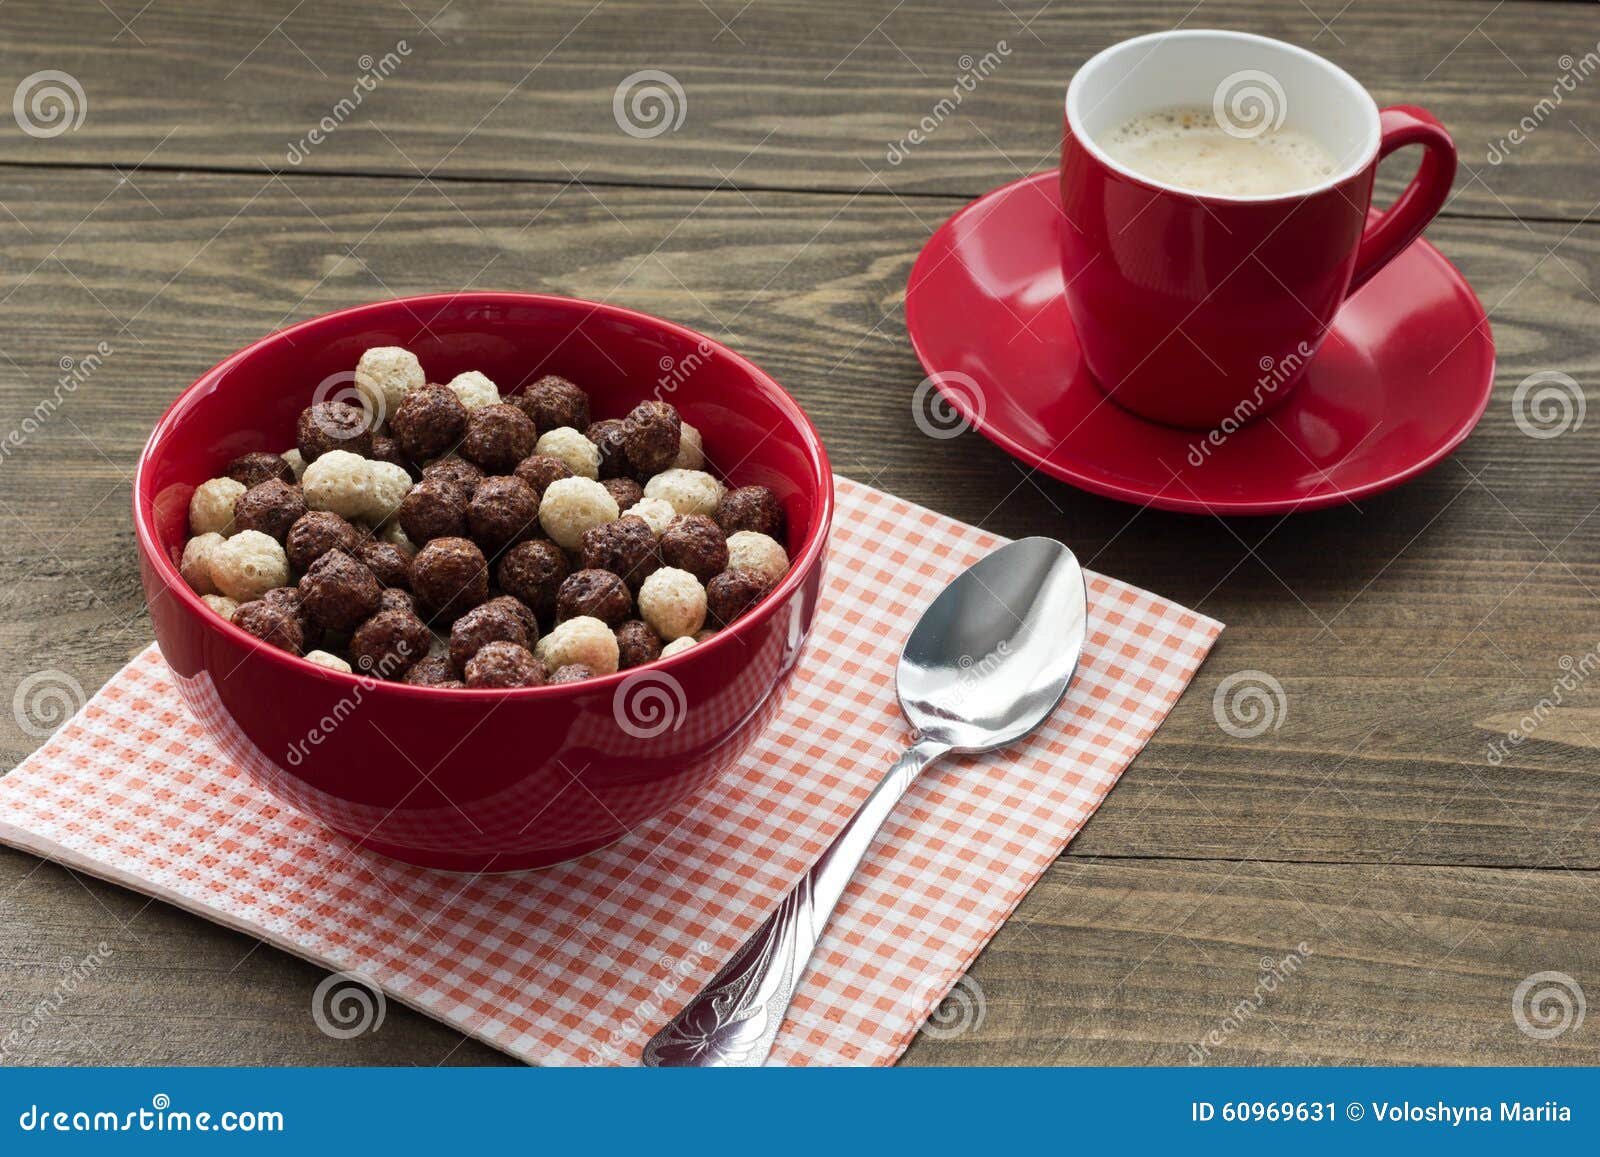 A healthy breakfast cereal balls with milk and coffee on the table